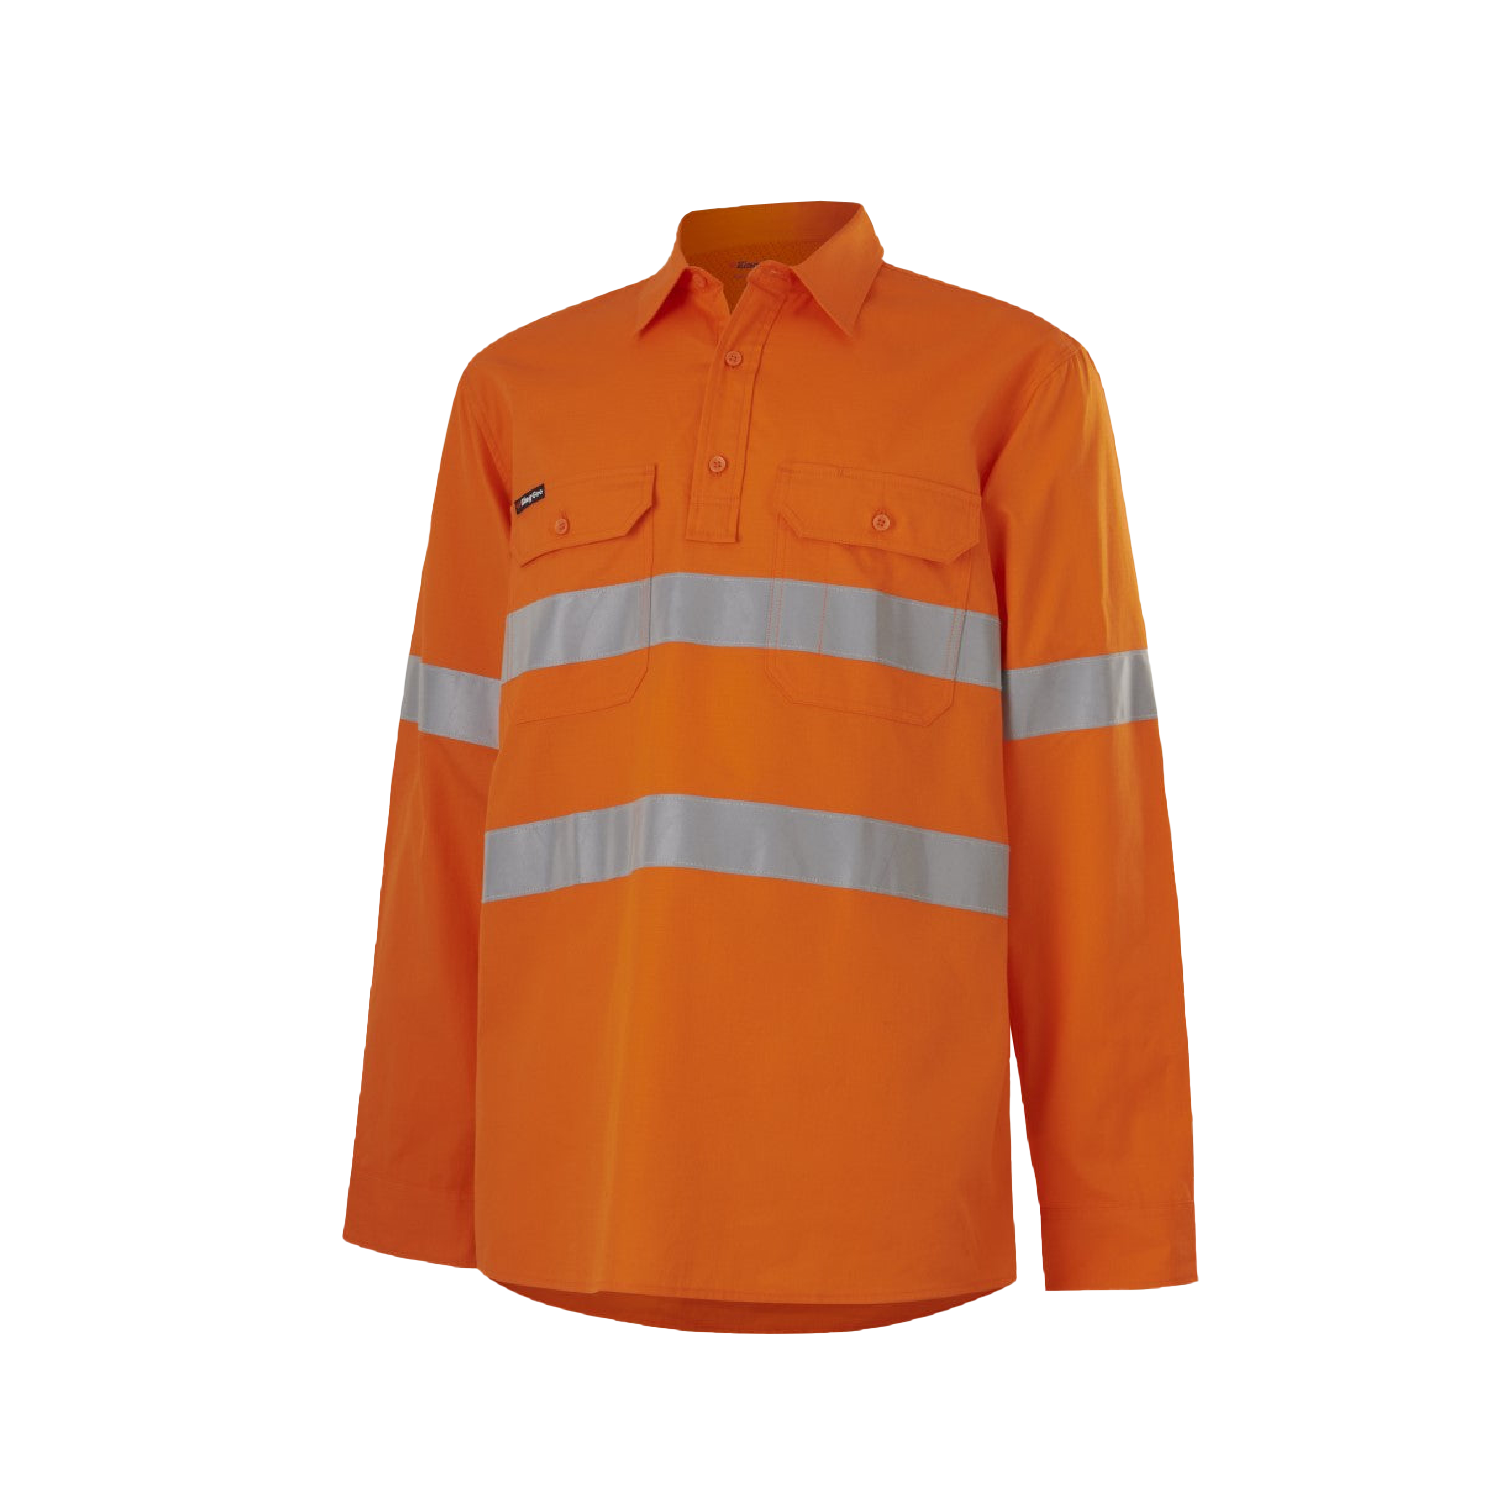 KingGee Men's Workcool Vented Closed Front Shirt Taped L/S - Orange ...